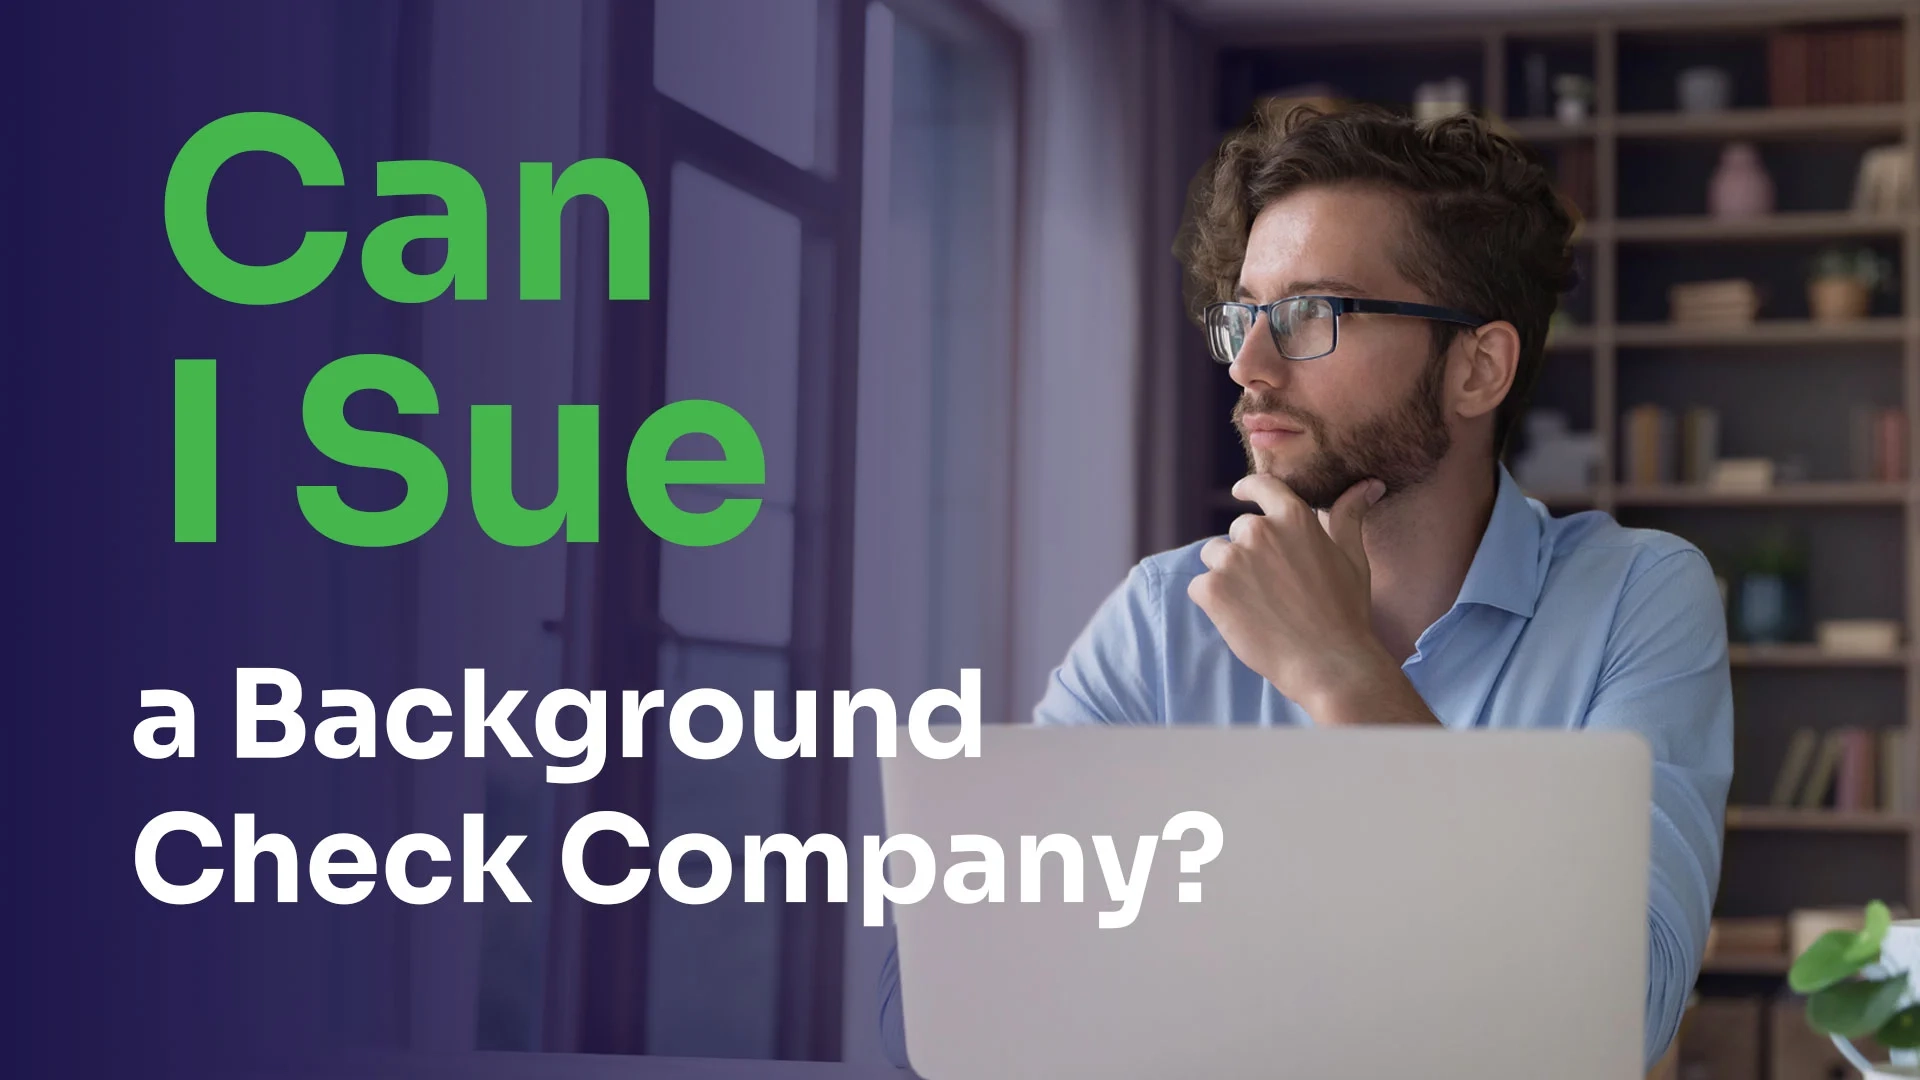 man sitting on his workplace thinking about suing company for background check